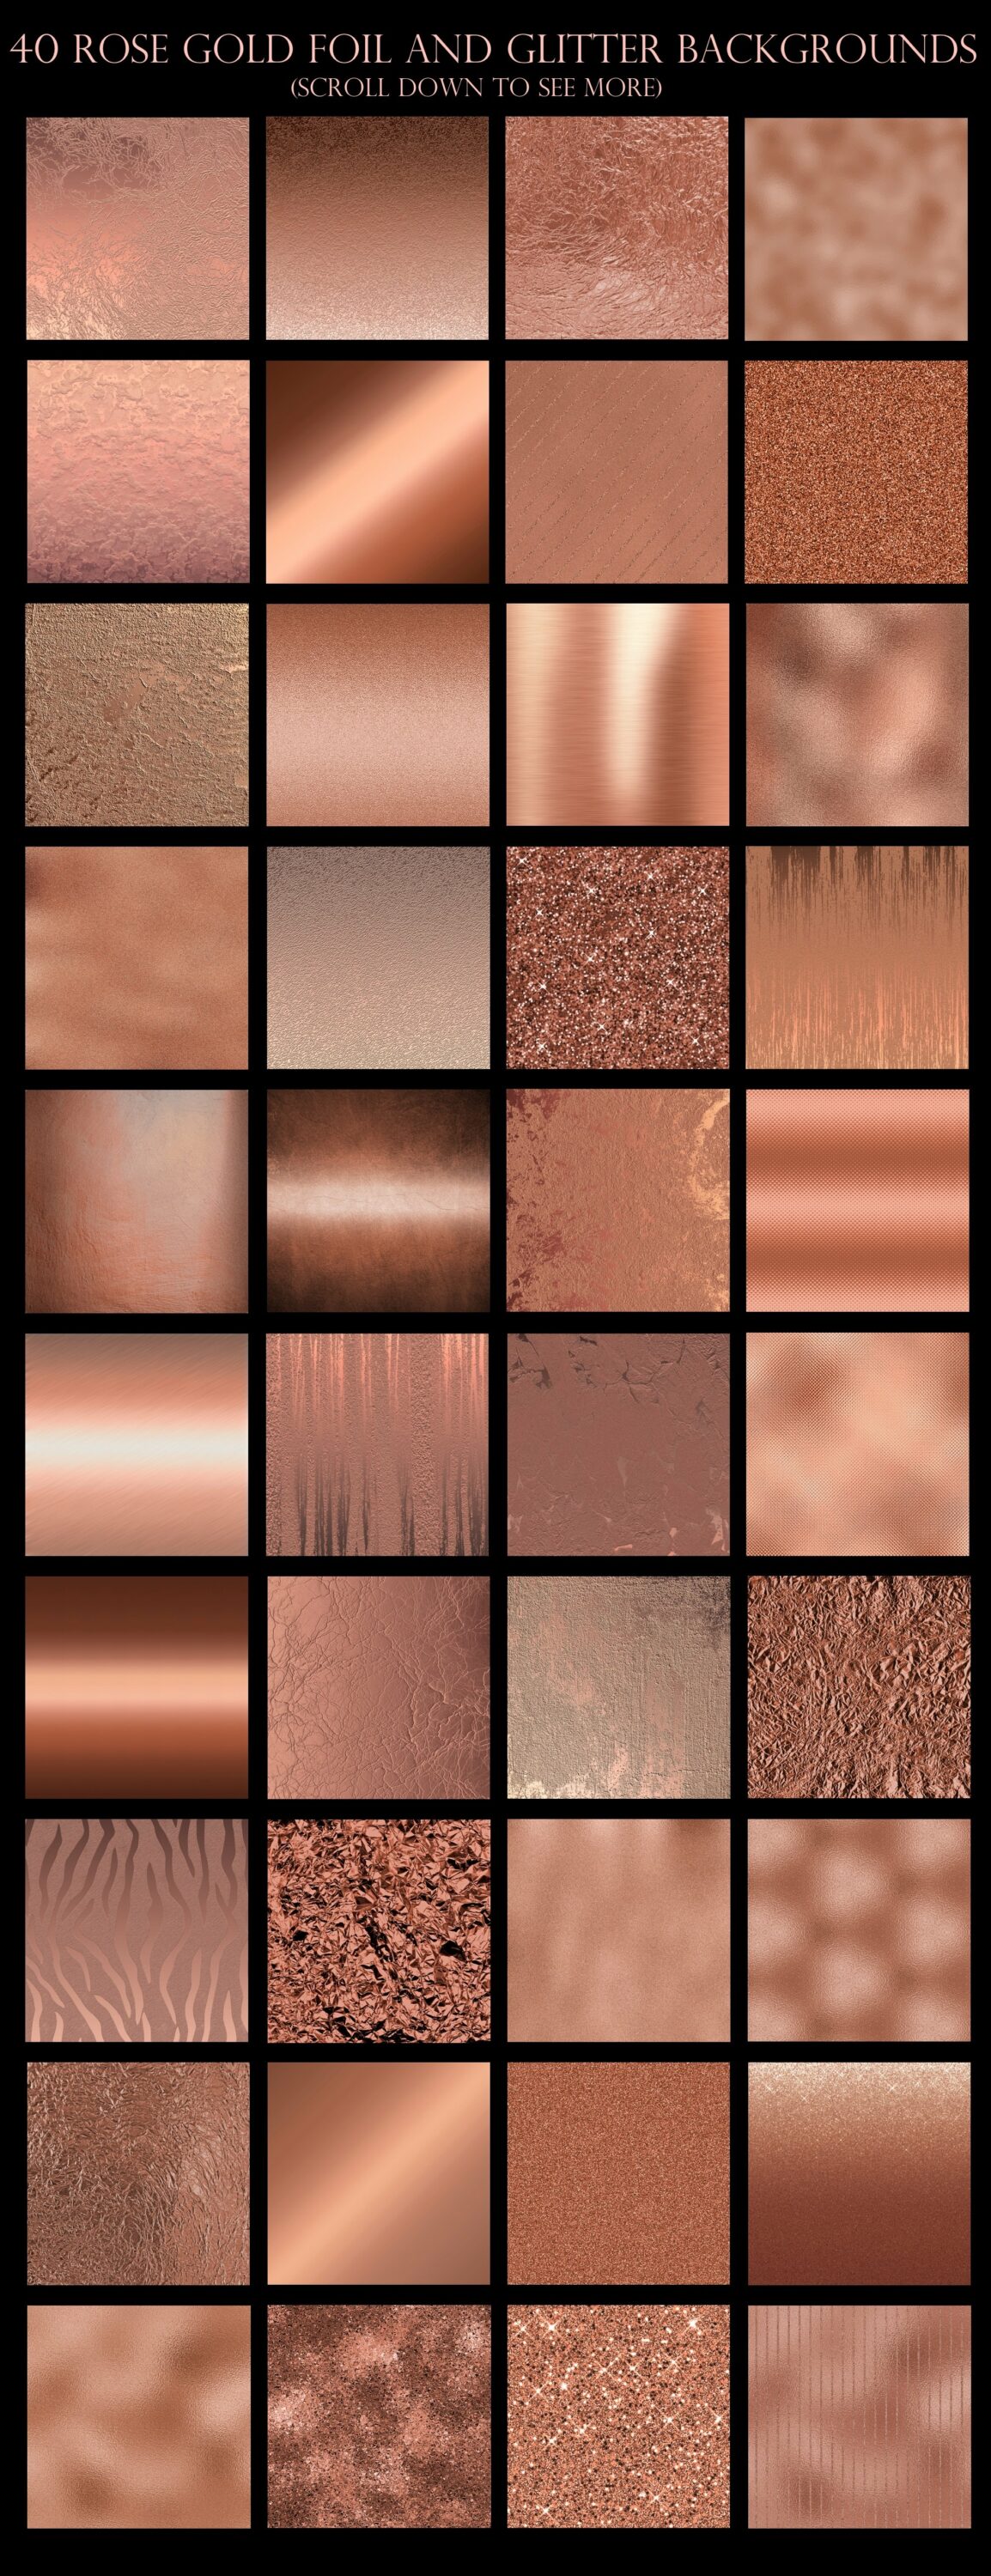 40 rose gold foil and glitter backgrounds.